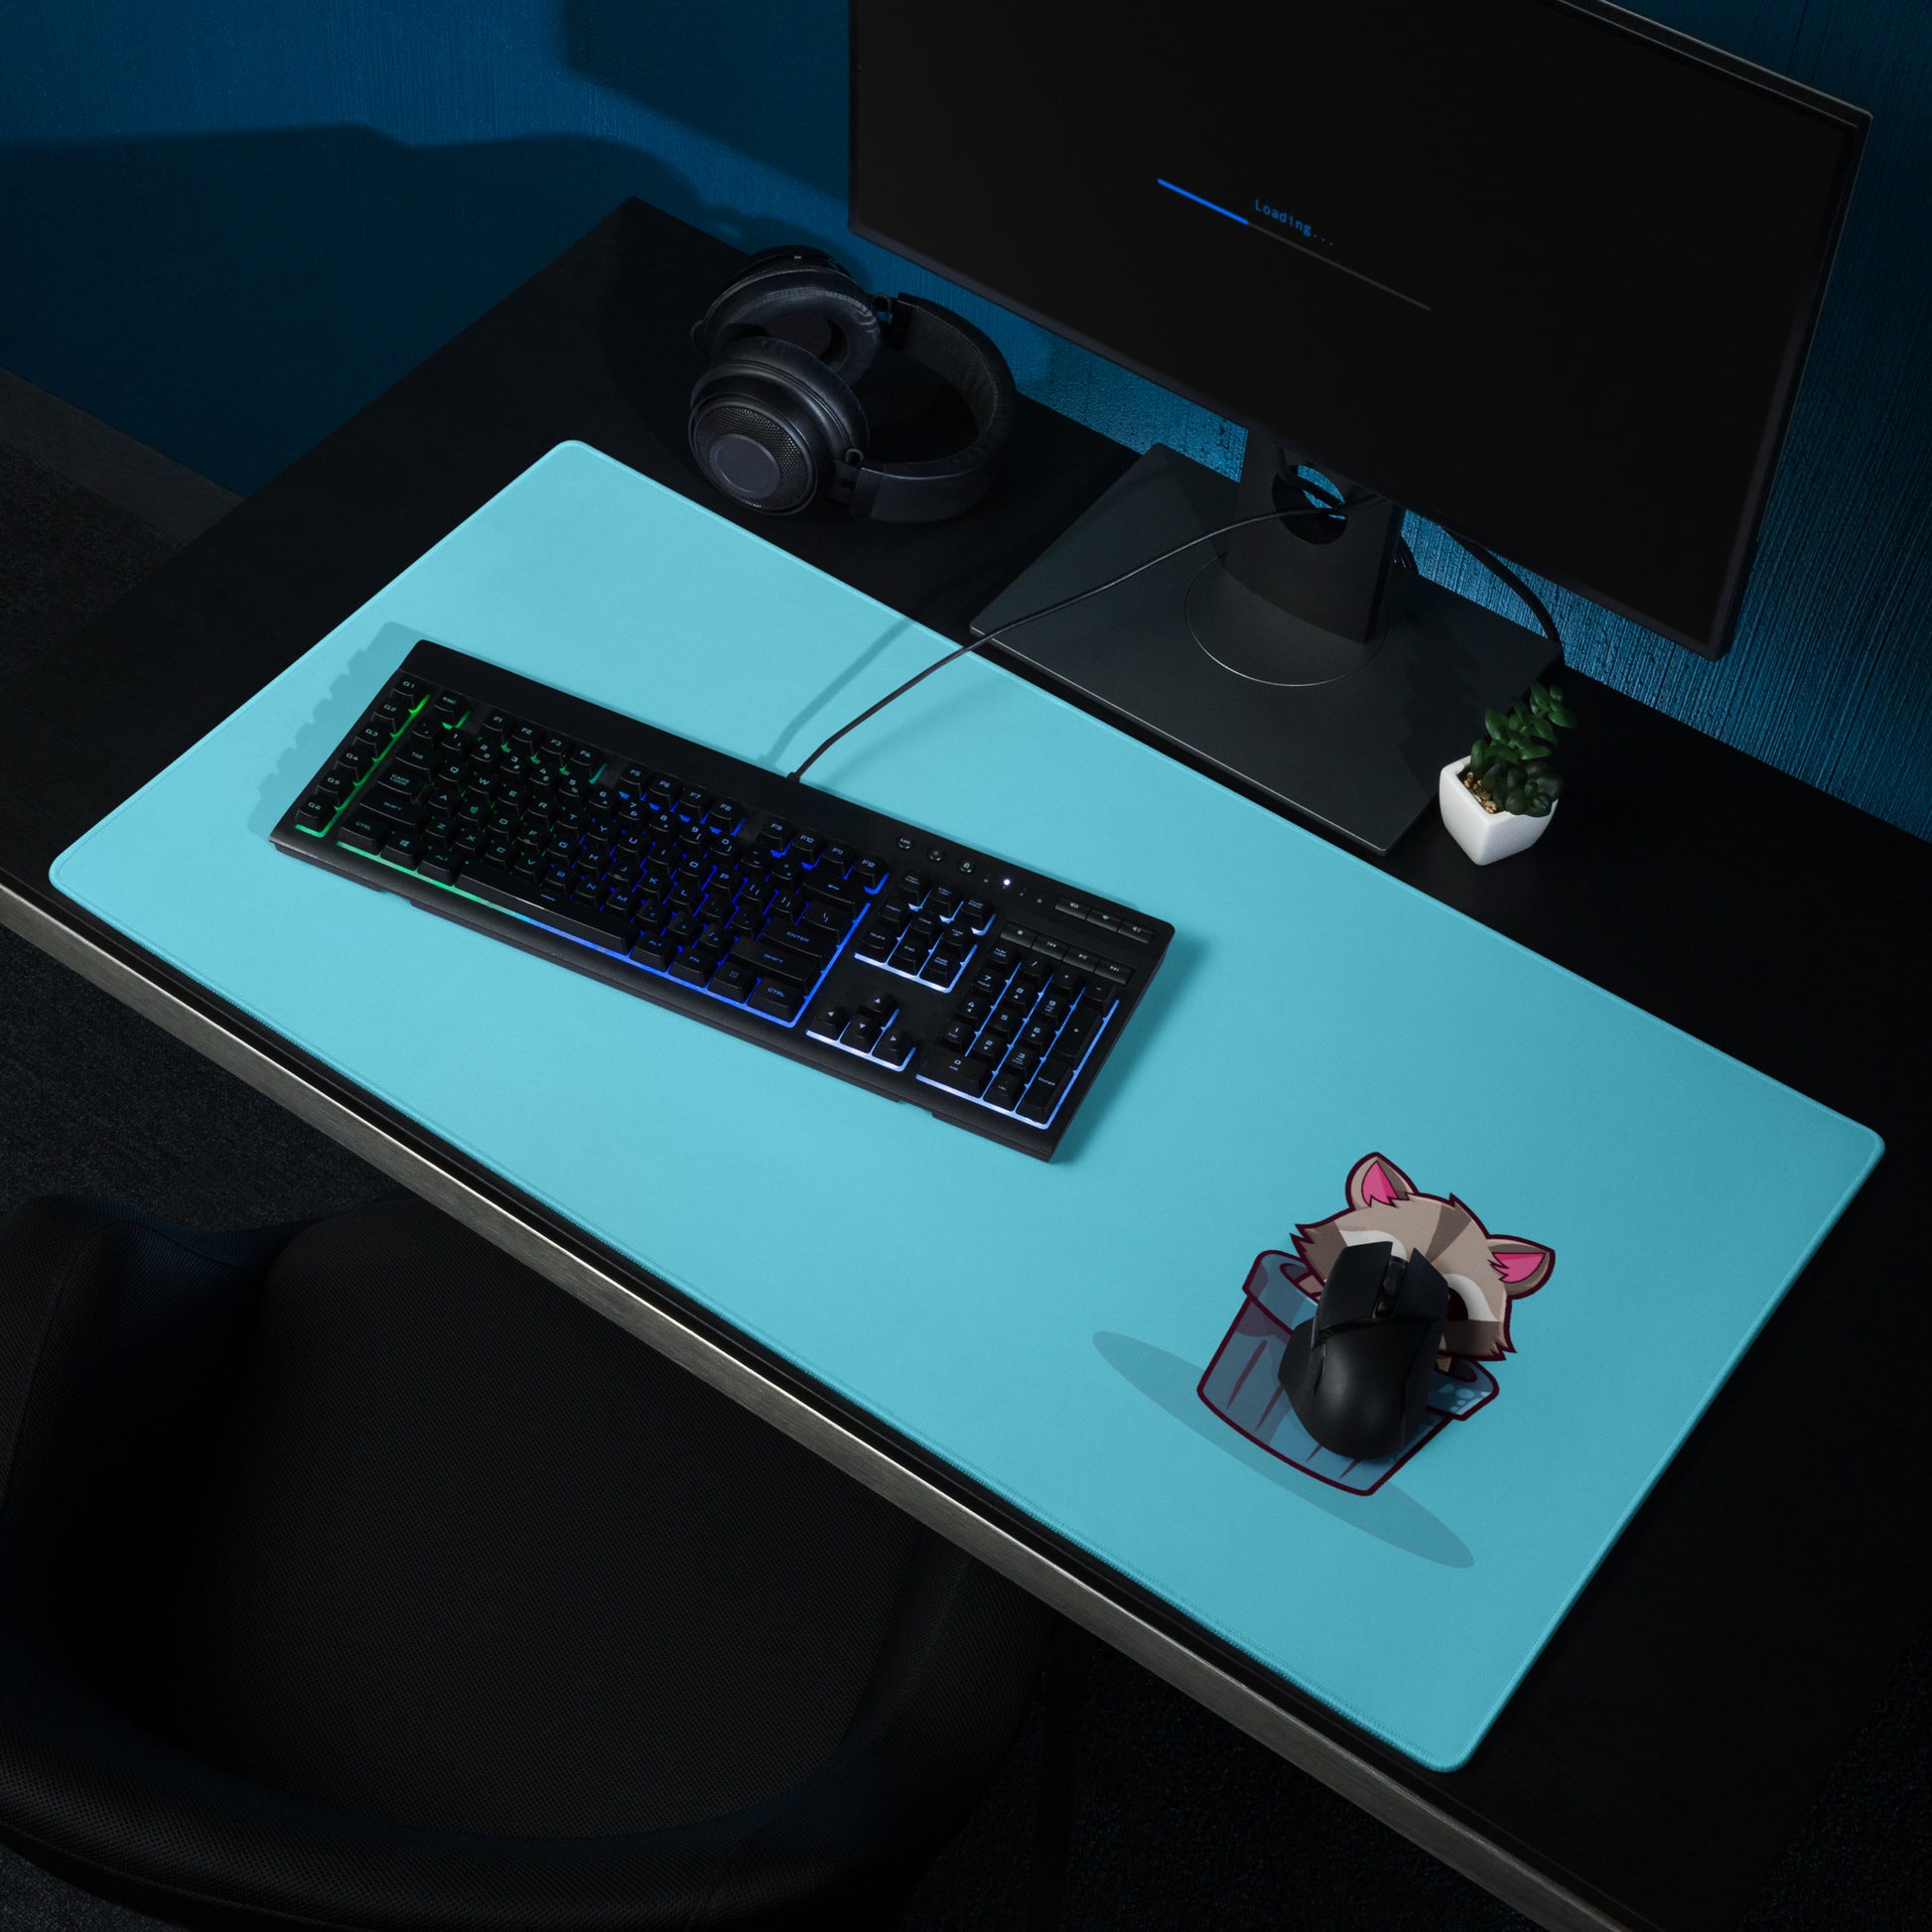 A gaming desk pad with a kawaii raccoon in a garbage can on a blue background. A keyboard and mouse sit on it.